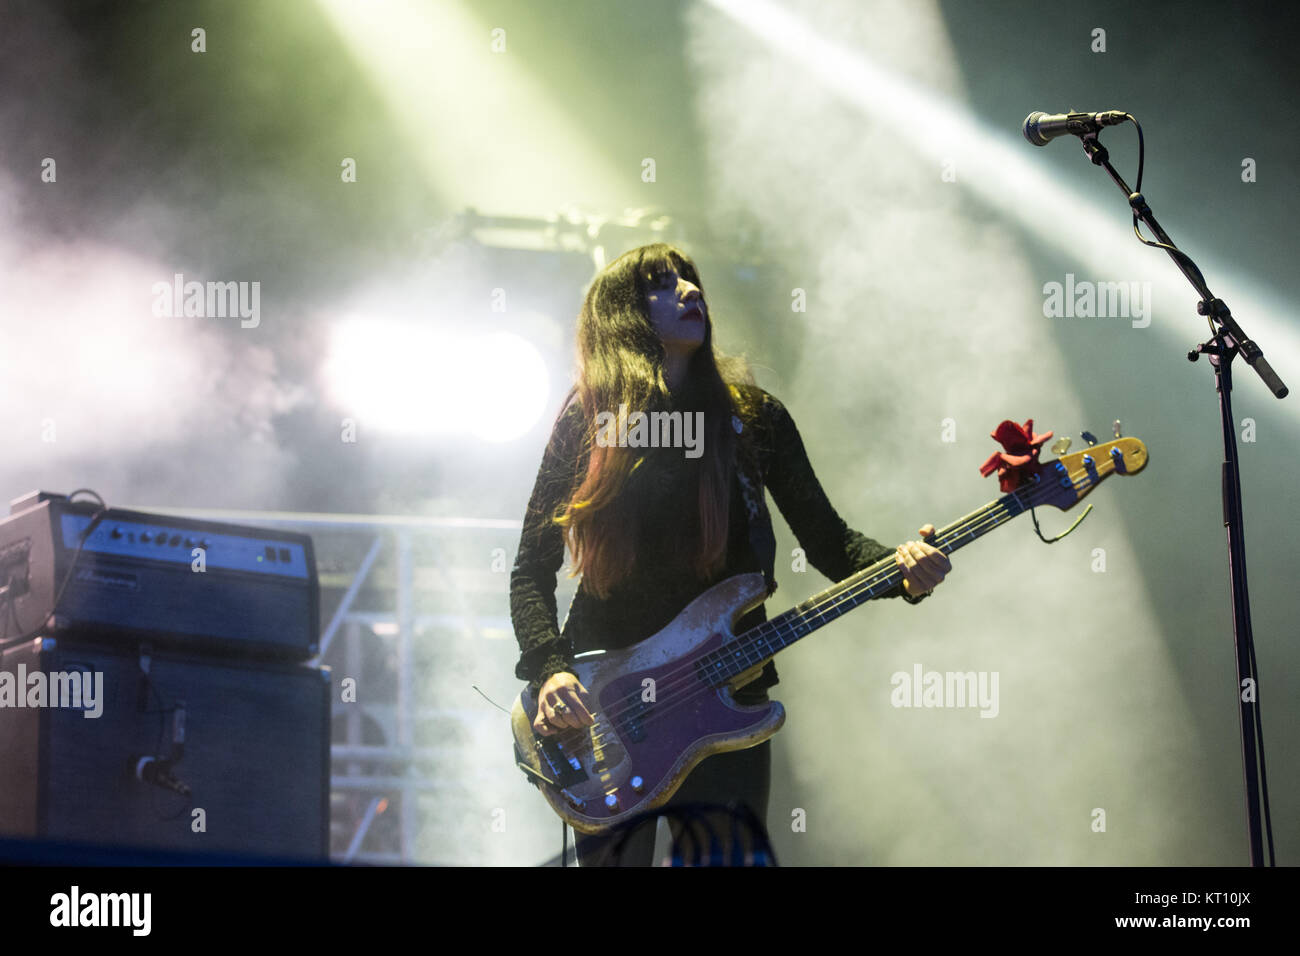 Norway, Oslo – August 11, 2017. The American rock band Pixies performs a live concert concert during the Norwegian music festival Øyafestivalen 2017 in Oslo. Here bass player Paz Lenchantin is seen live on stage. Stock Photo